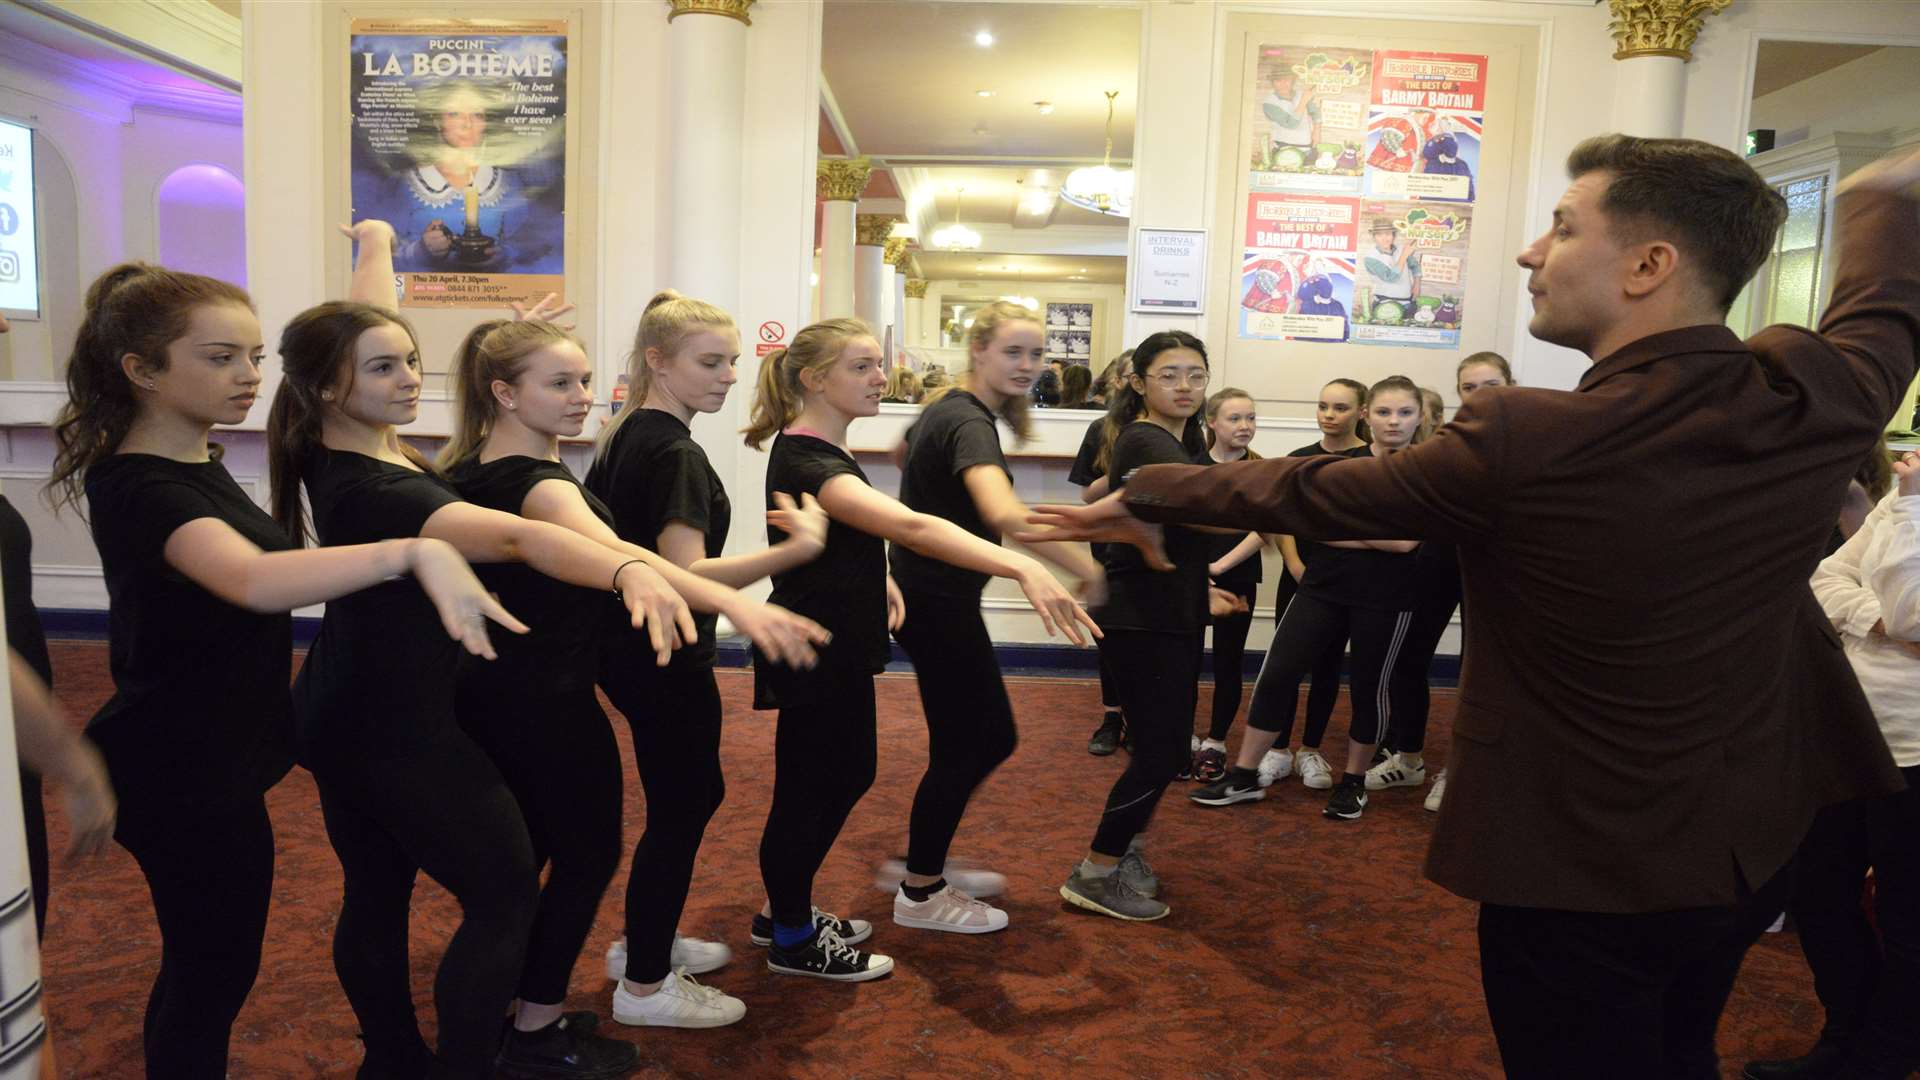 Pasha puts pupils from Julie's Dance School through their paces in rehearsals at Leas Cliff Hall in Folkestone